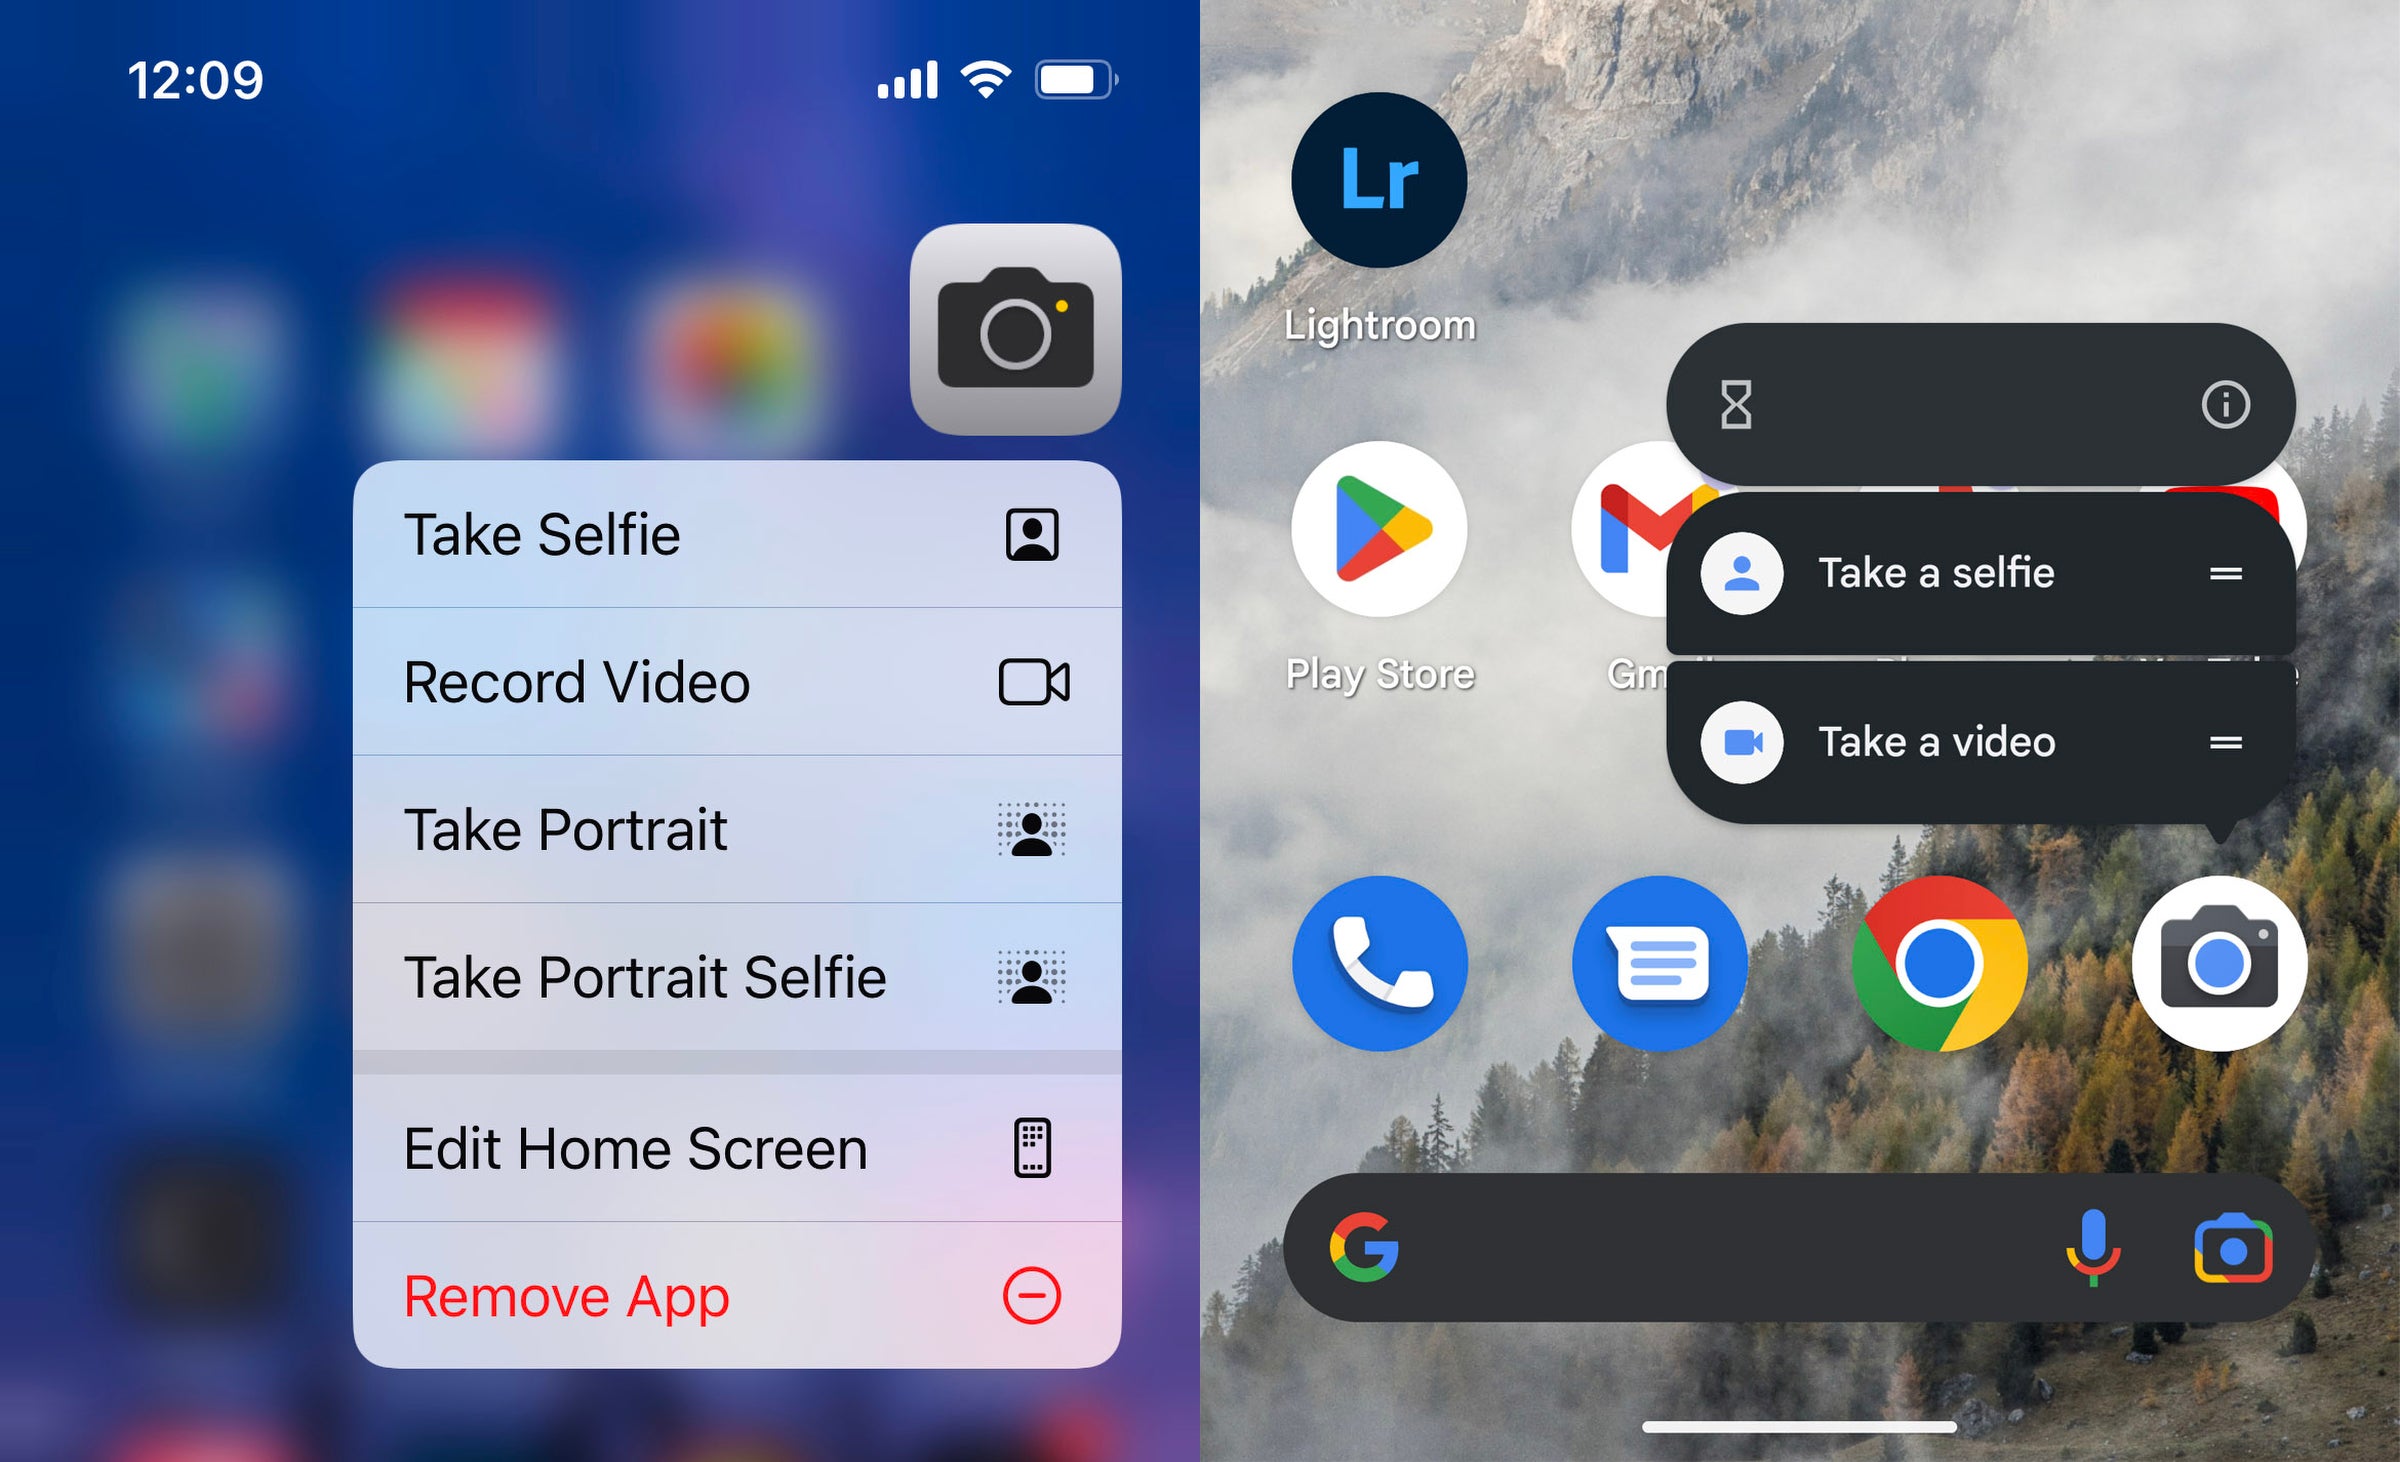 Screenshots of Apple and Google camera apps with shortcuts shown.